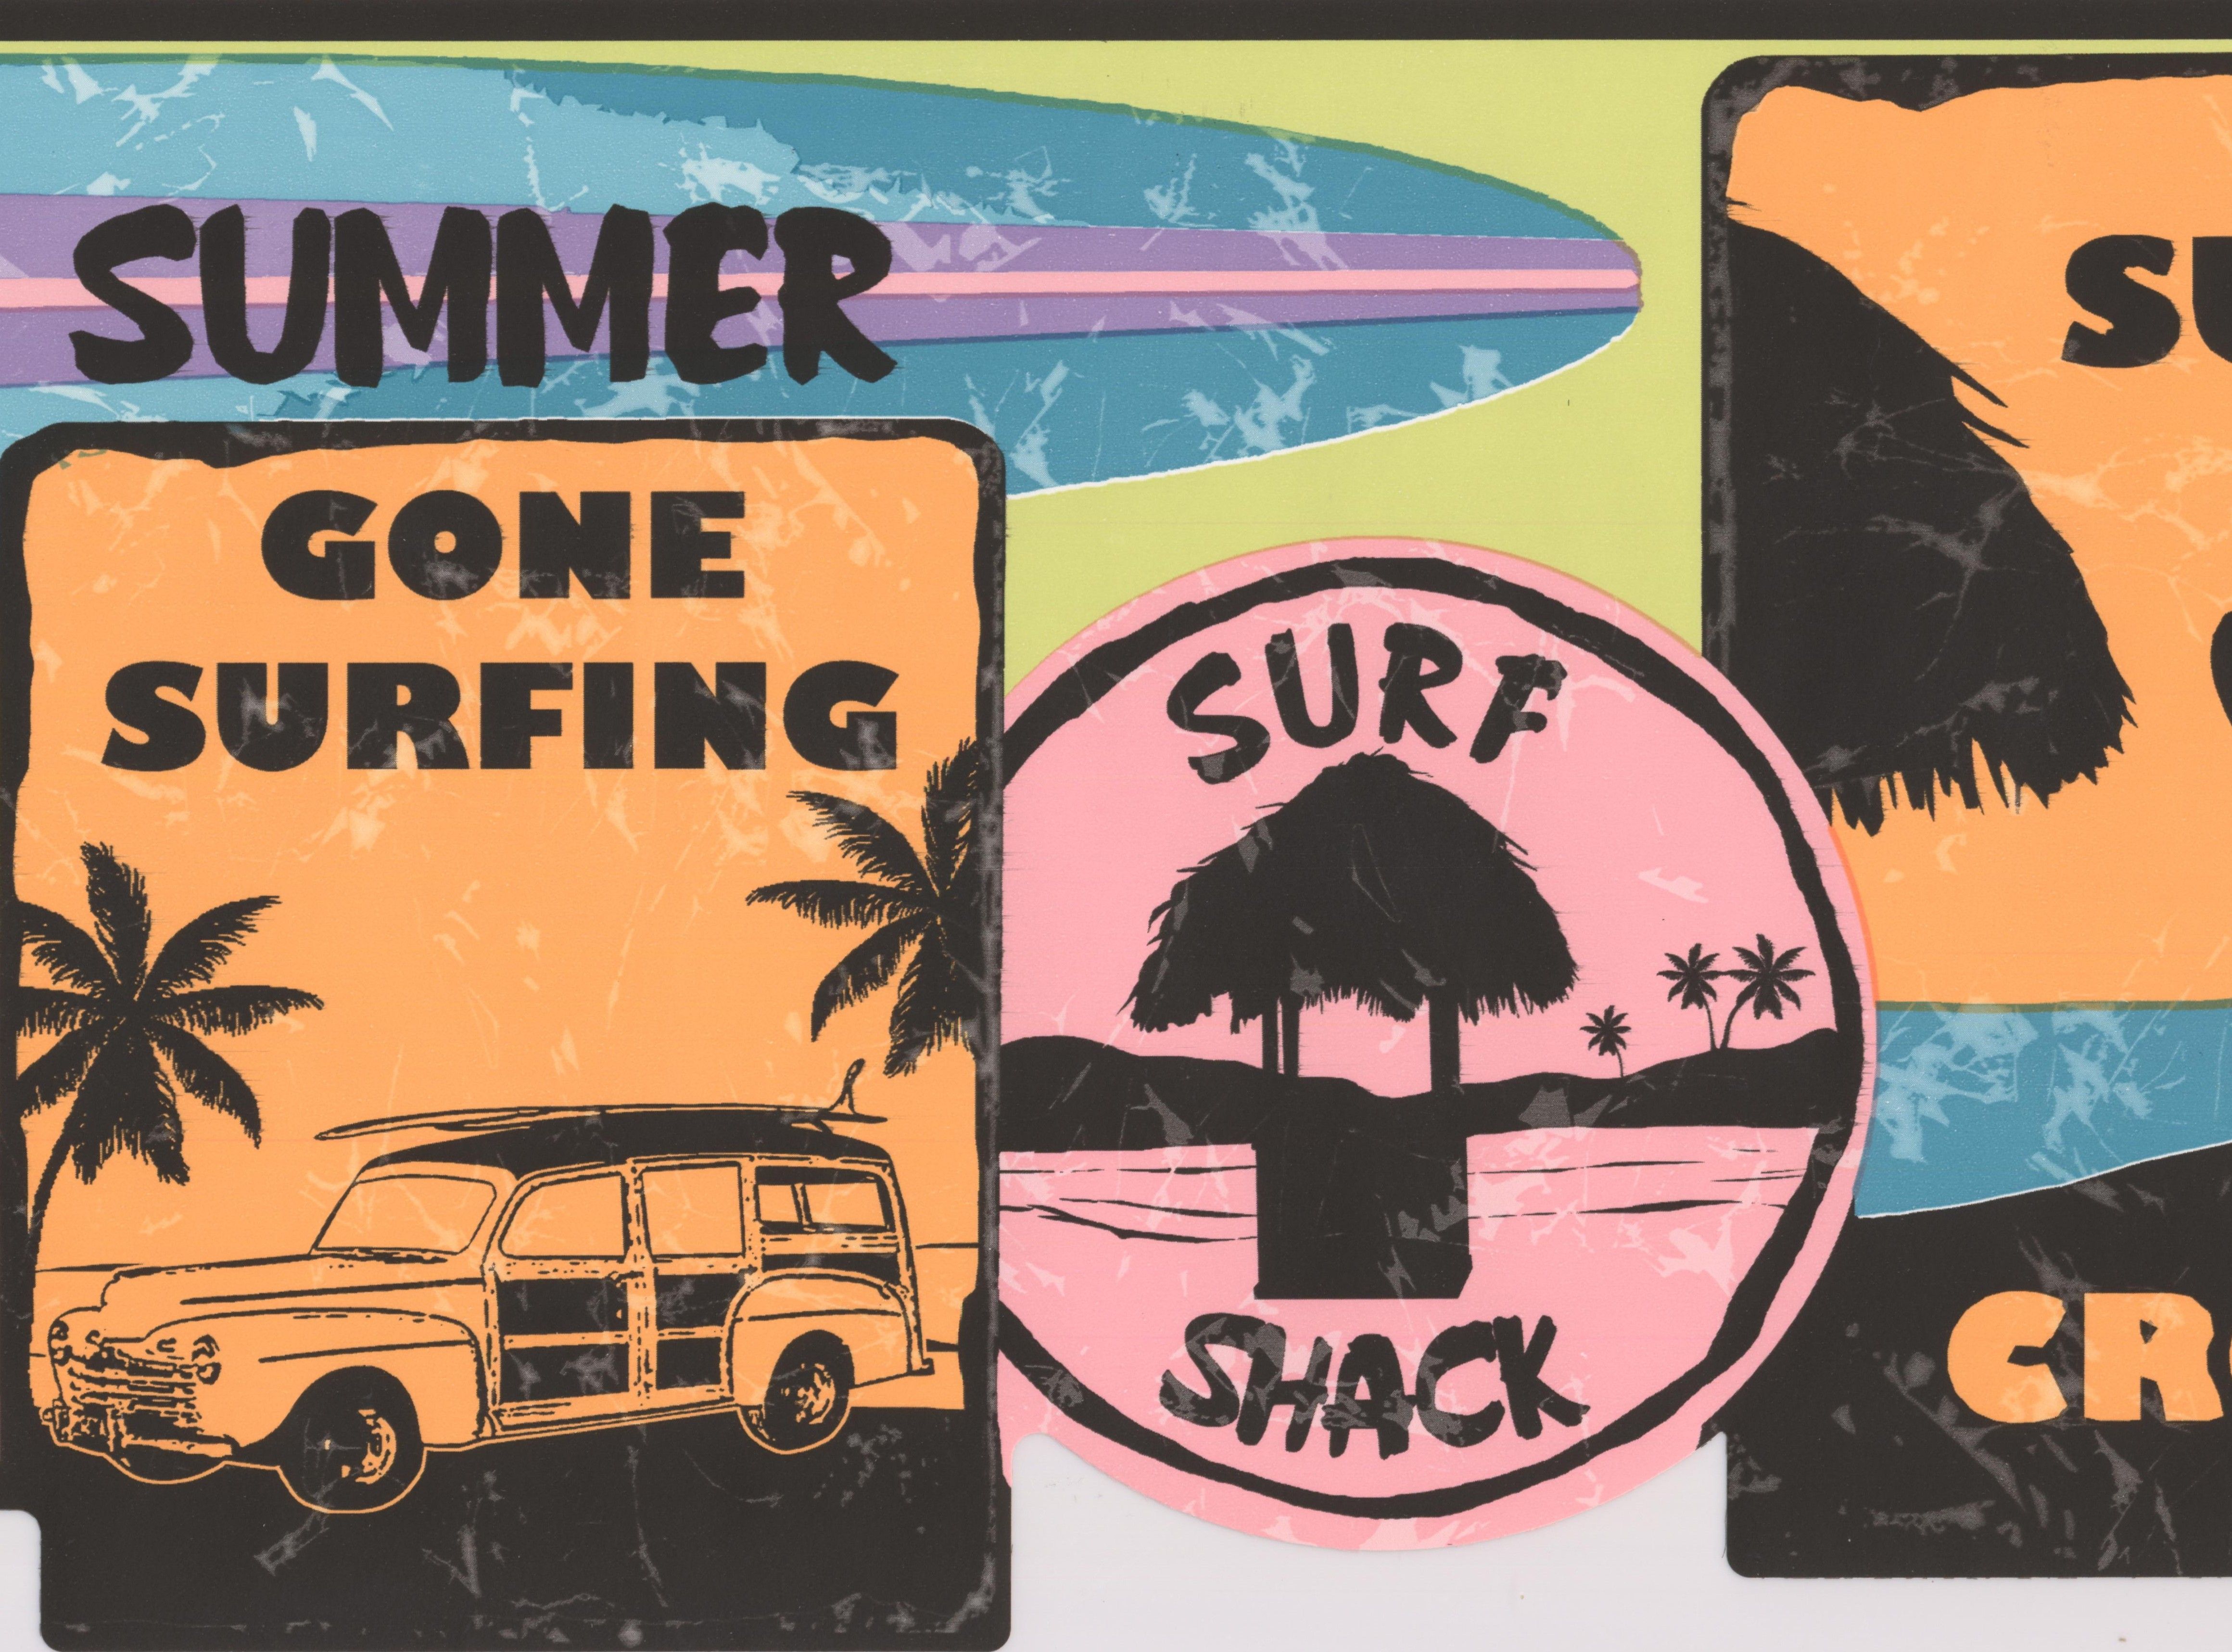 Wallpaper Border Surf Signs Vintage Wall Border for Surfer Teen, Roll 15 ft X 9 in